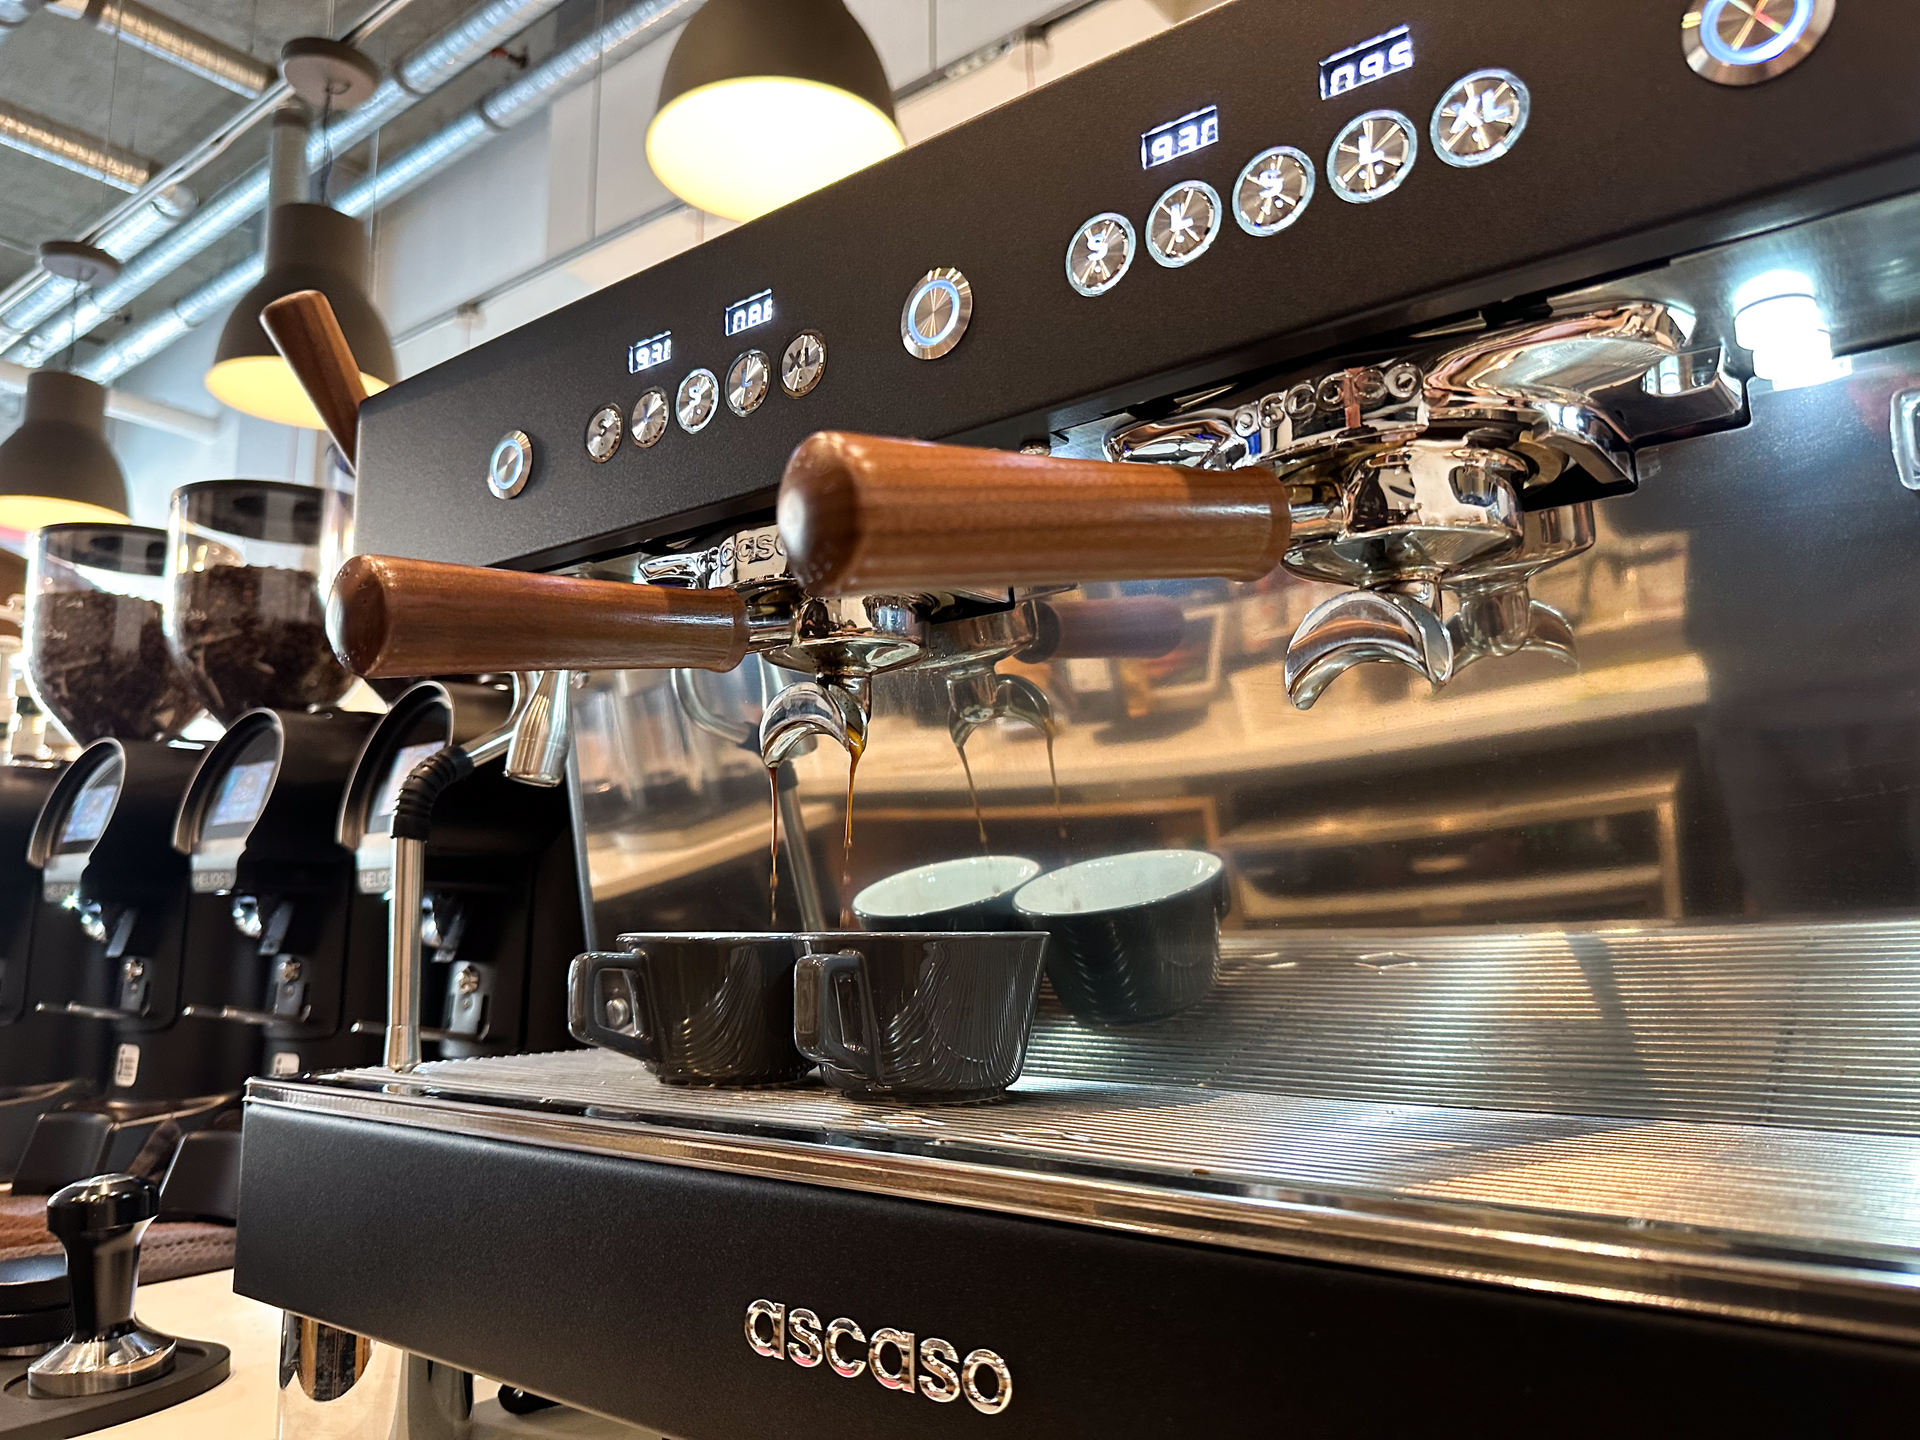 Barista One – Course & Certification at $ 149.00 Only